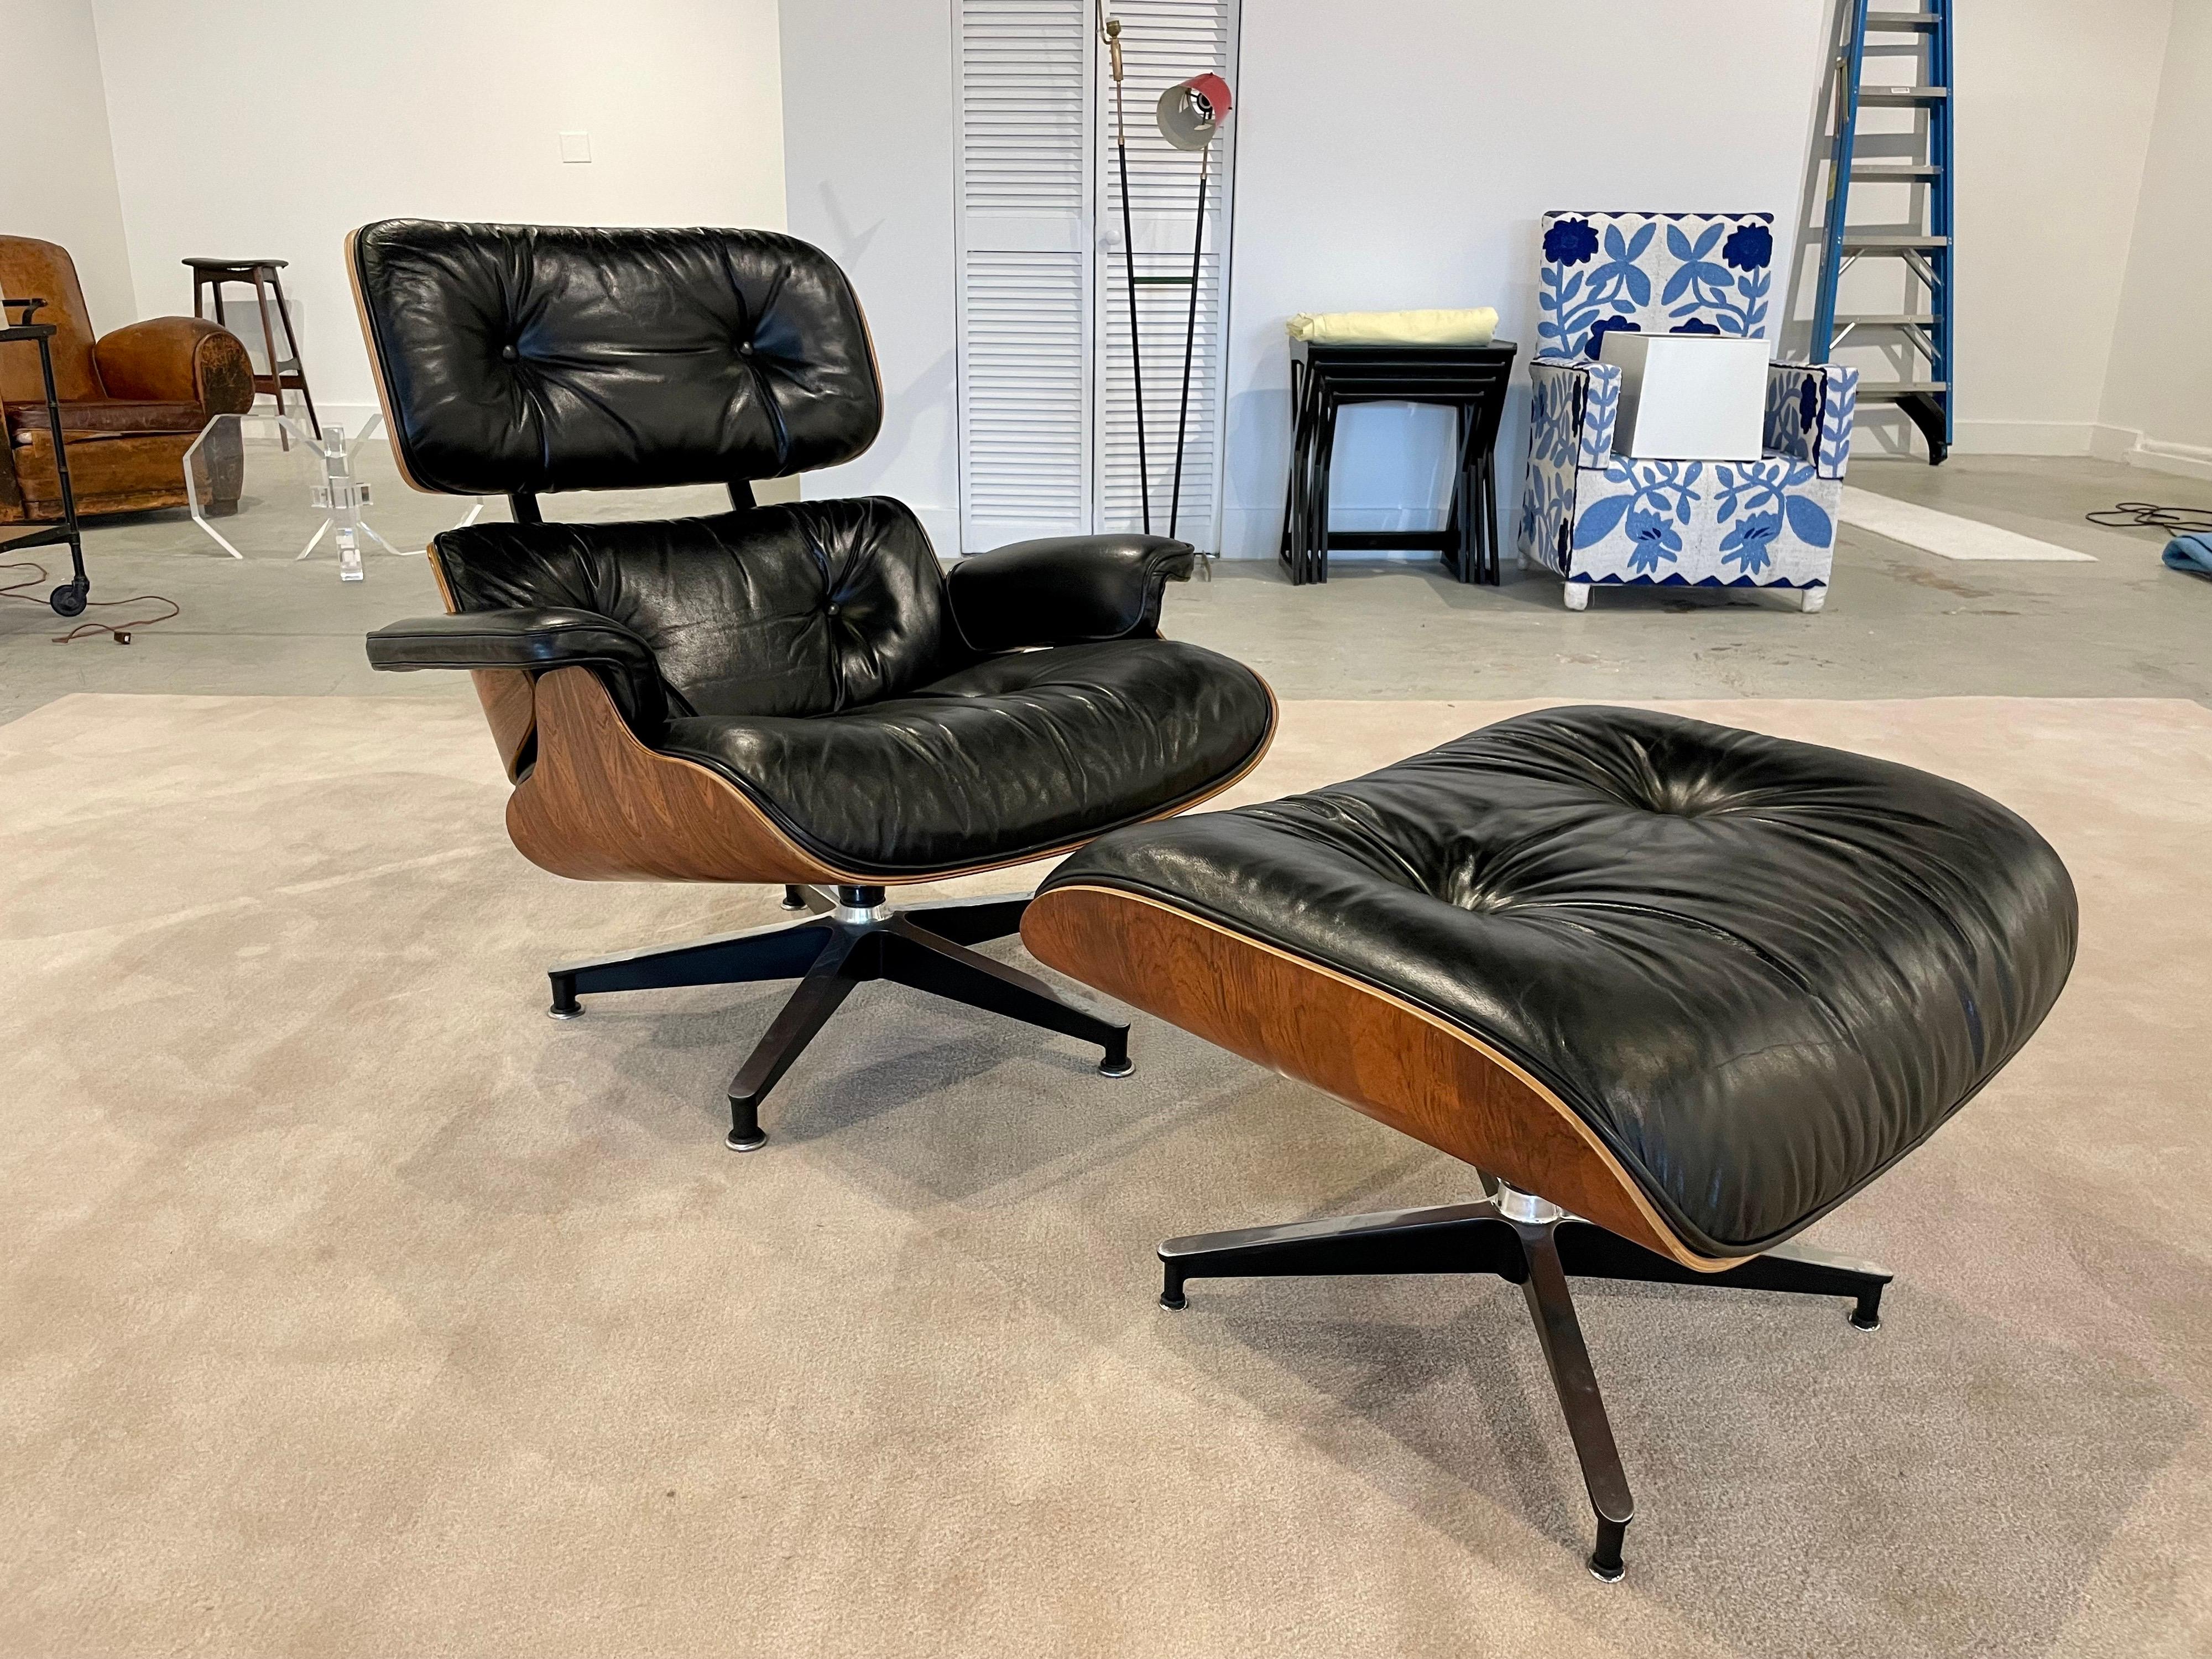 ALL vintage and professionally restored 2nd edition of the iconic Eames Lounge Chair + Ottoman. As elegant as it is comfortable, this lounge chair is a piece emblematic of 20th century design. Original black leather and Brazilian rosewood. Leather